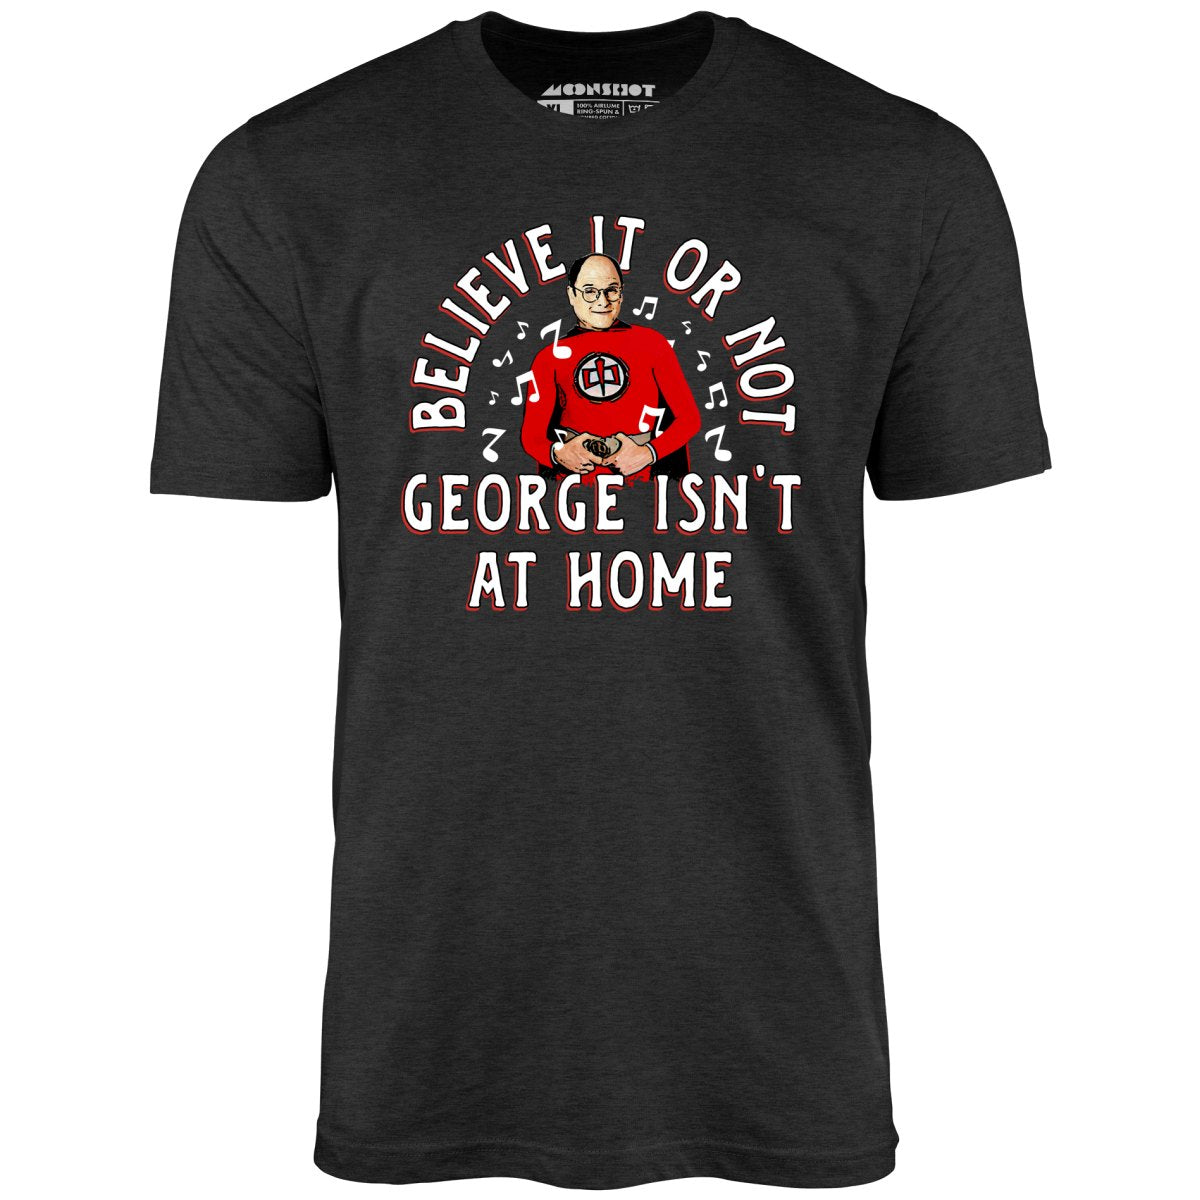 Believe It Or Not George Isn't at Home - Unisex T-Shirt